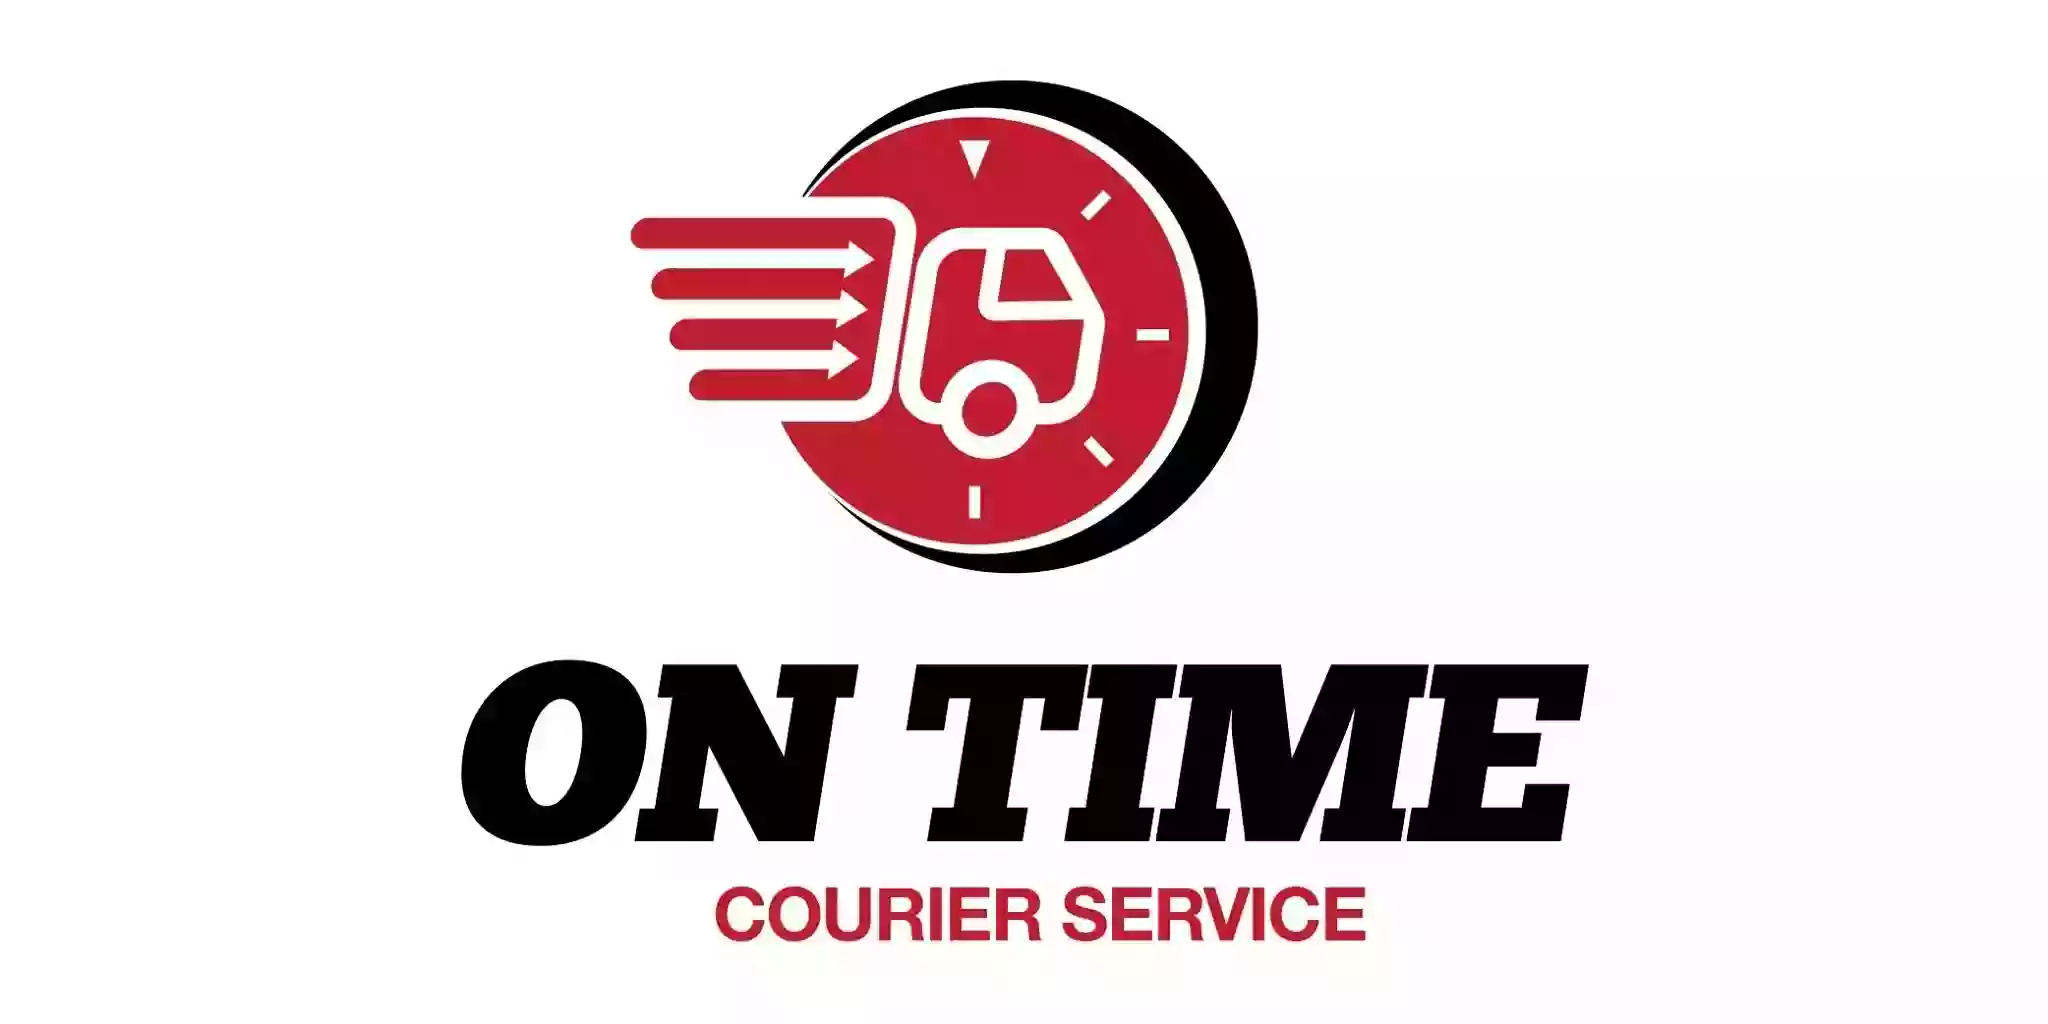 On Time Courier Service